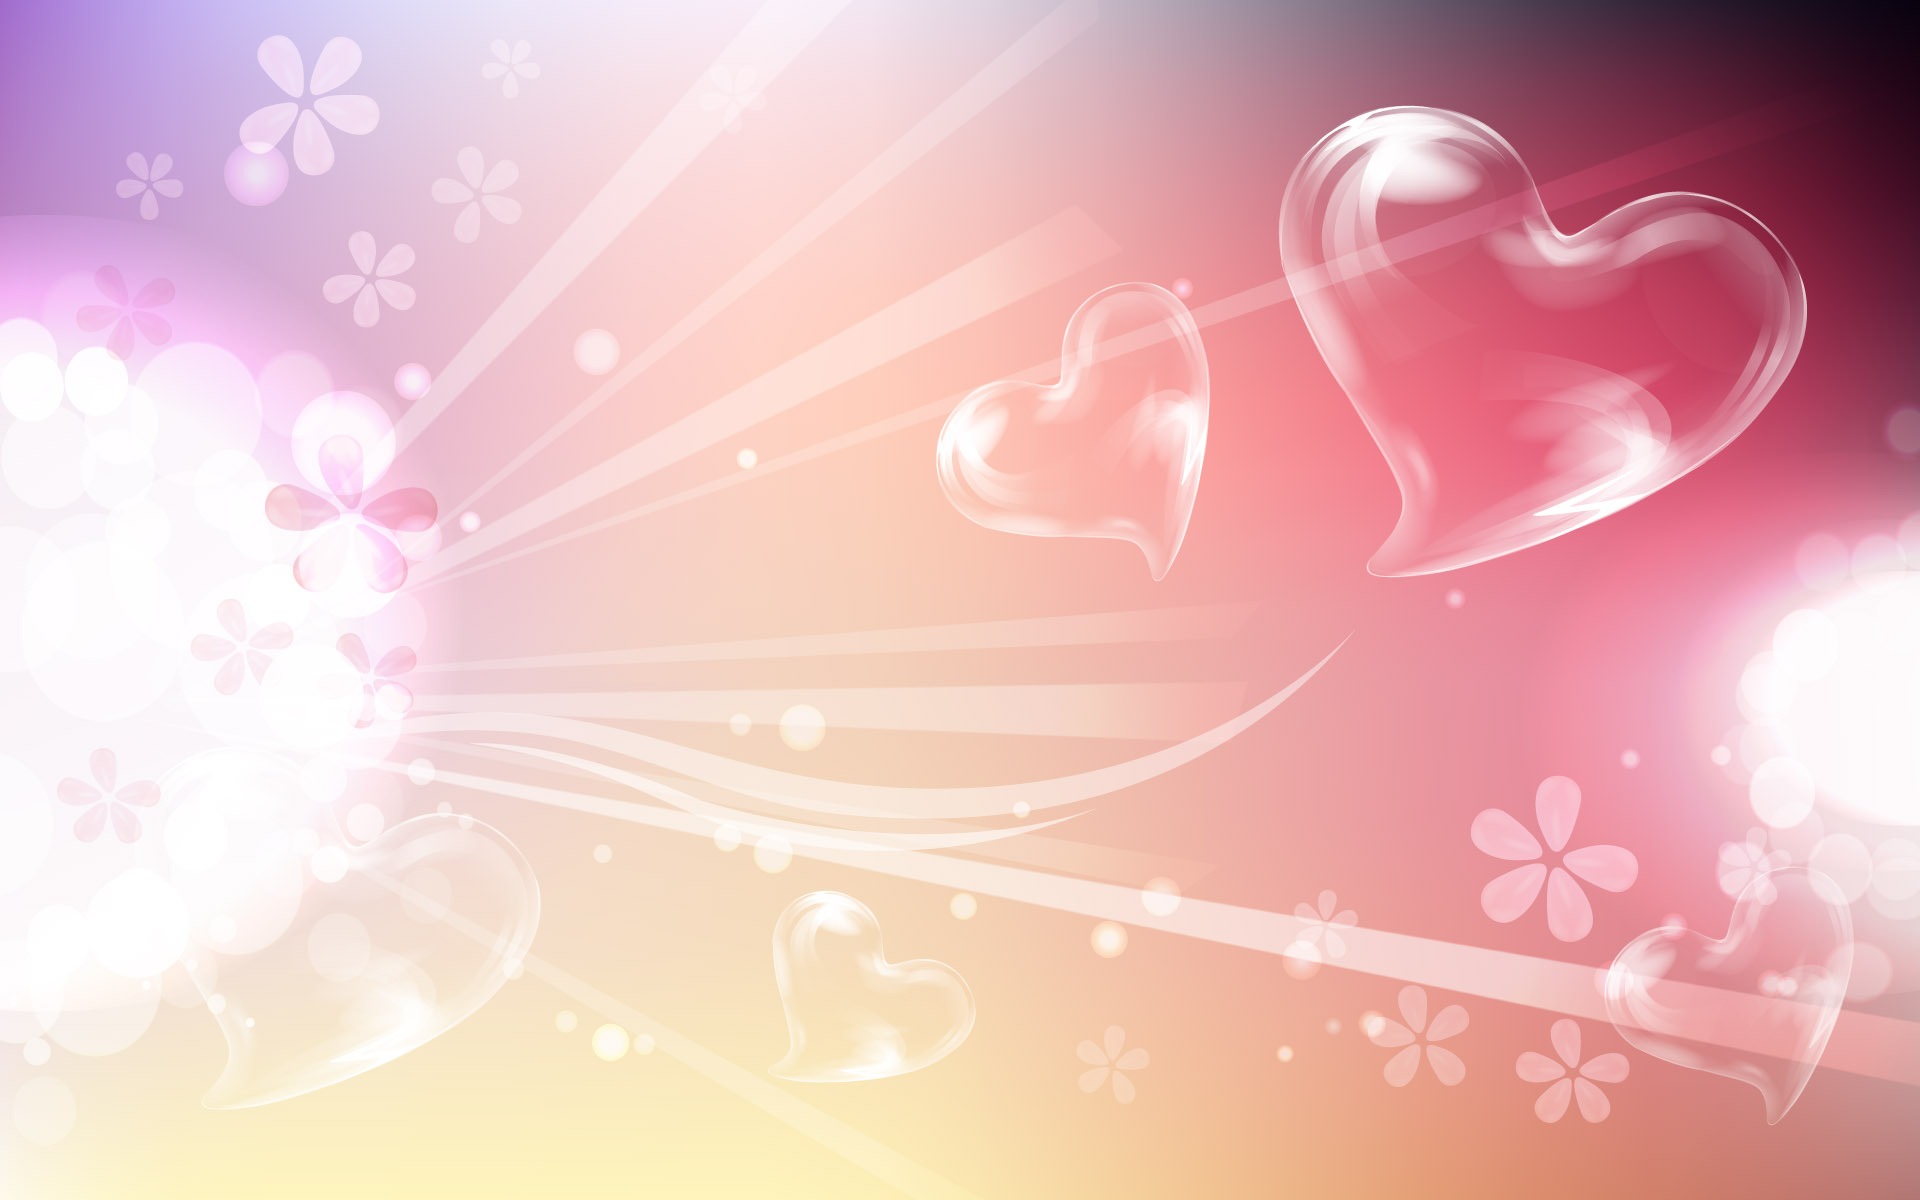 Valentine's Day Love Theme Wallpapers (2) #3 - 1920x1200